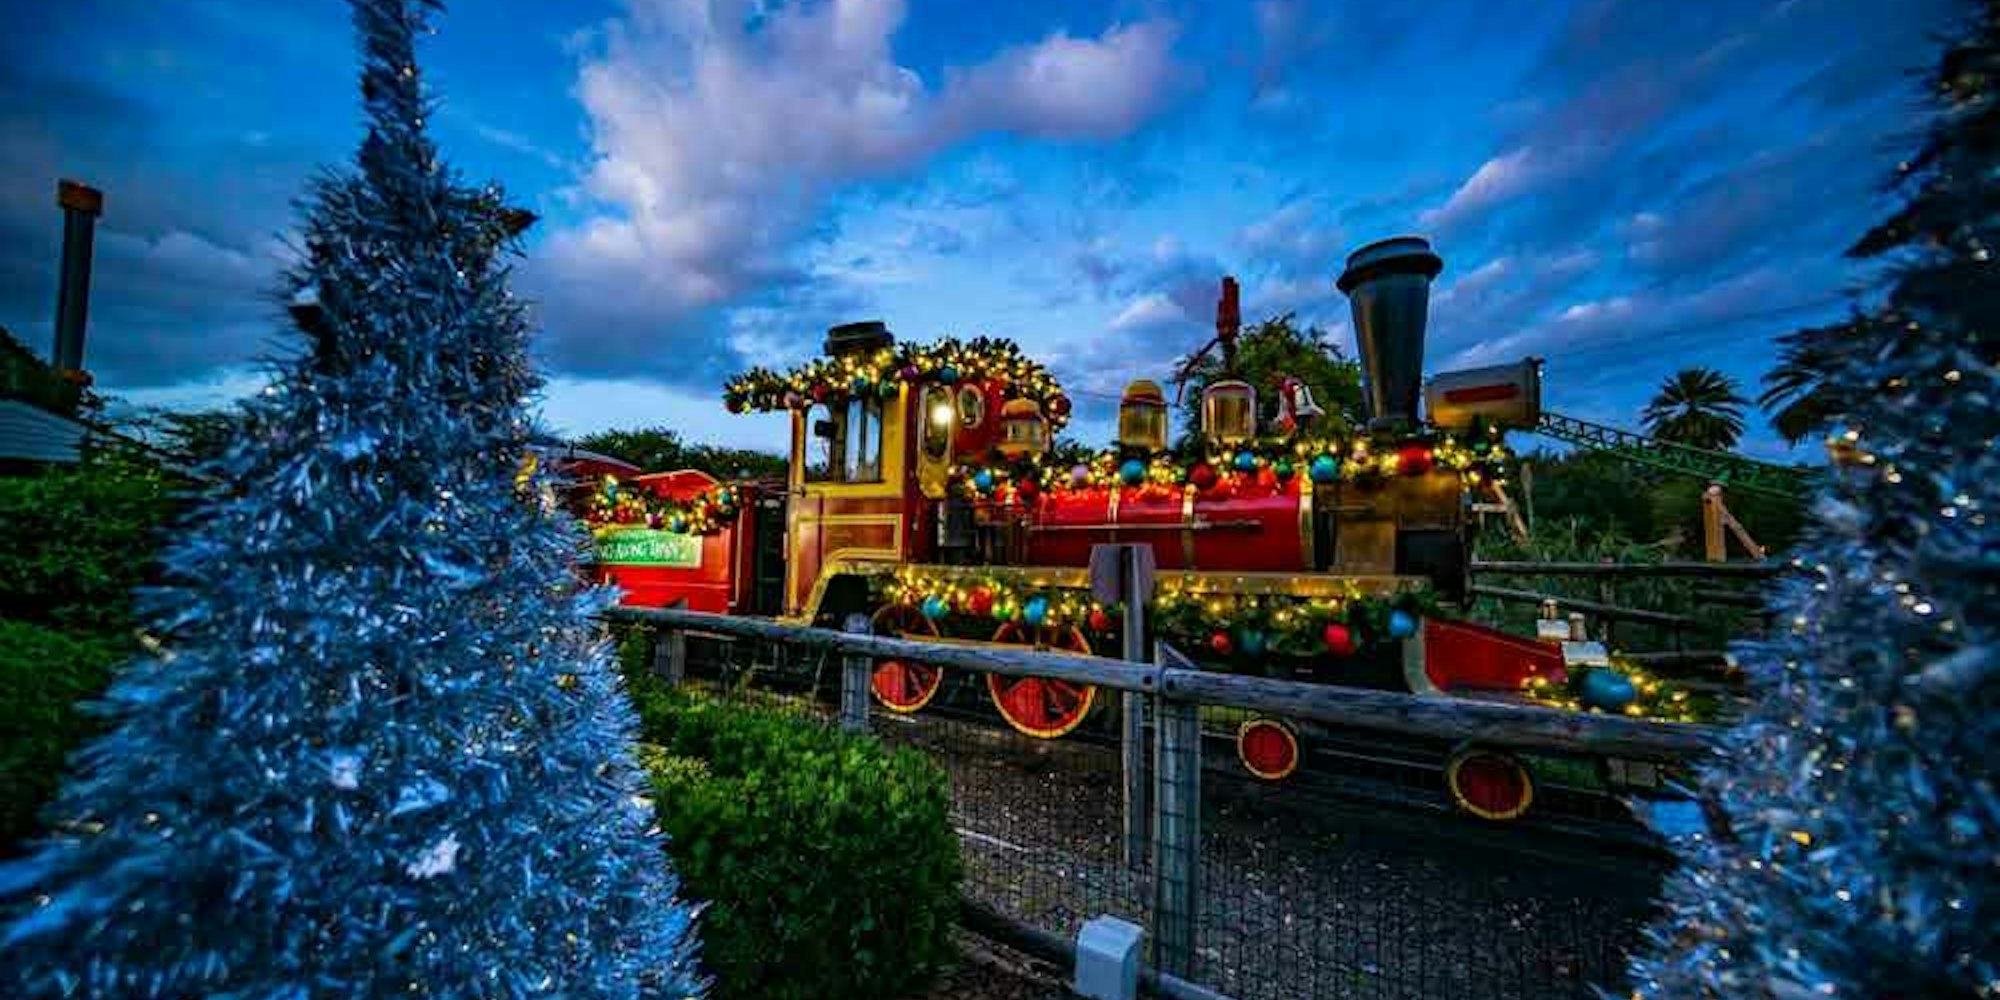 Cover Image for Christmas Town Returns to Busch Gardens Tampa 